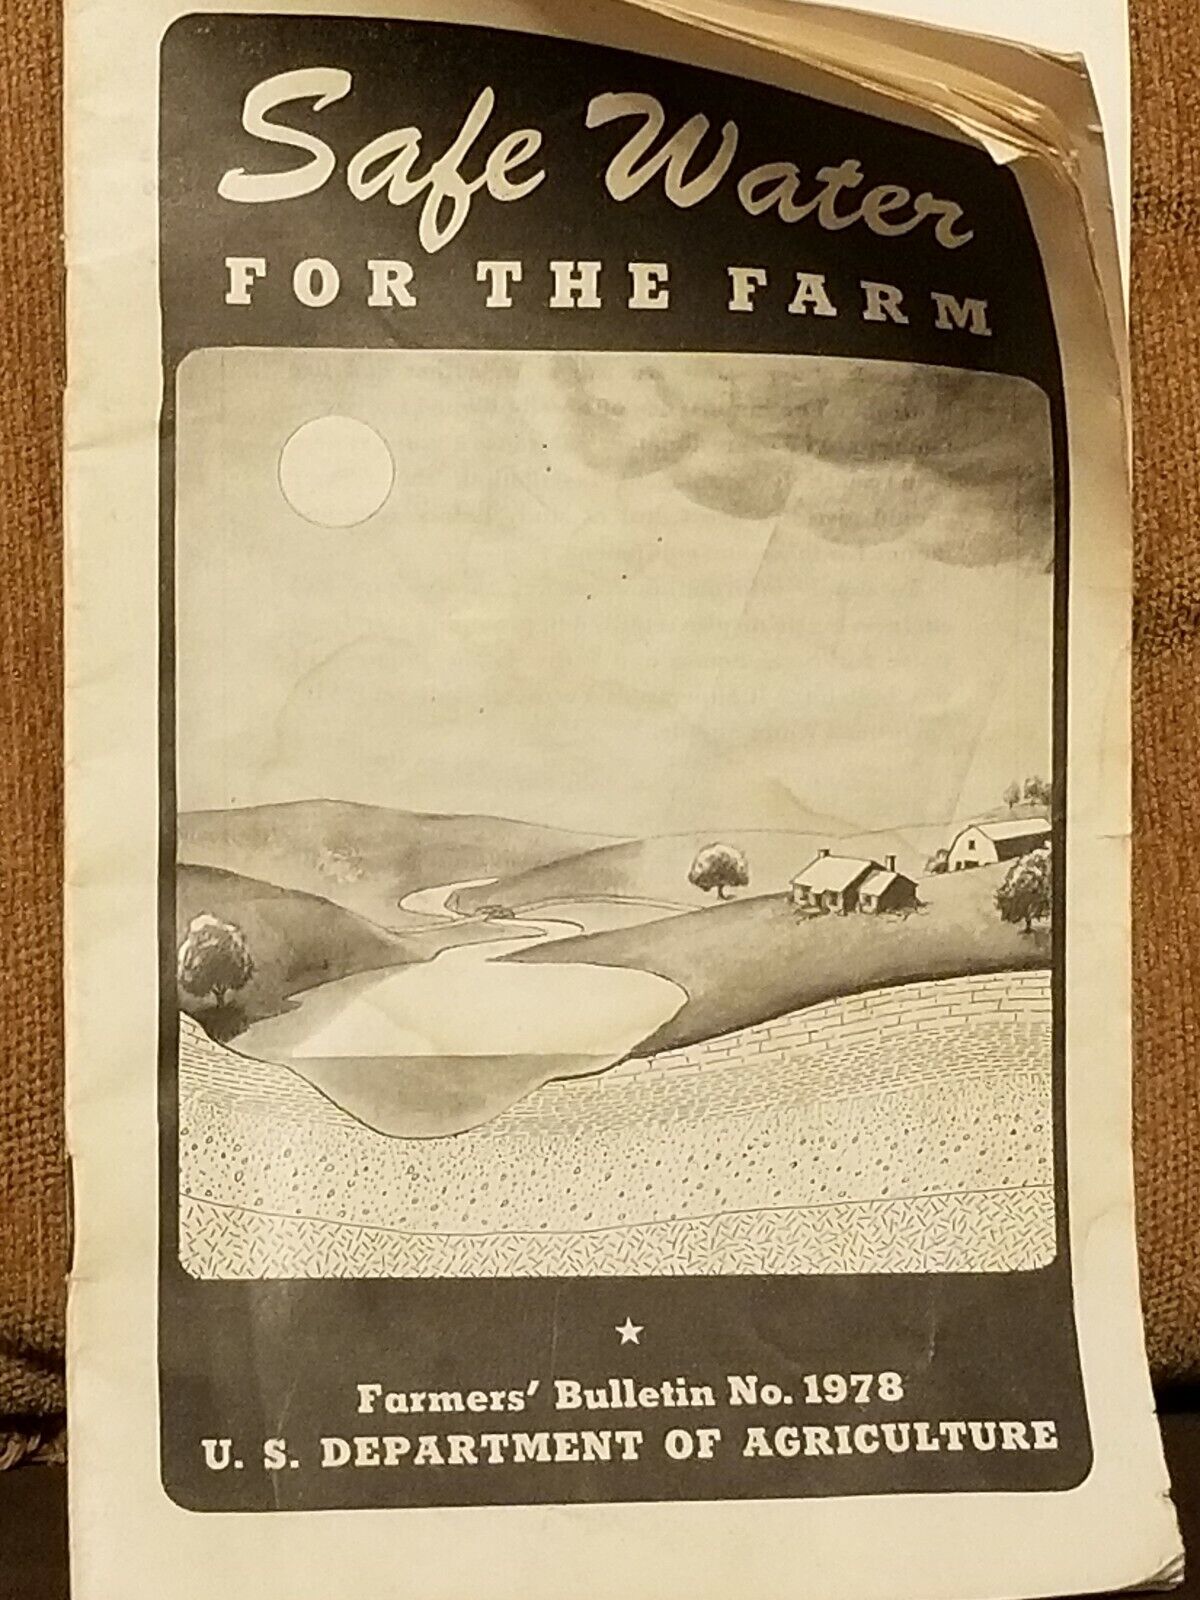 Vintage USDA Farmers Bulletin No 1978 Safe Water For The Farm 1948 Collectible